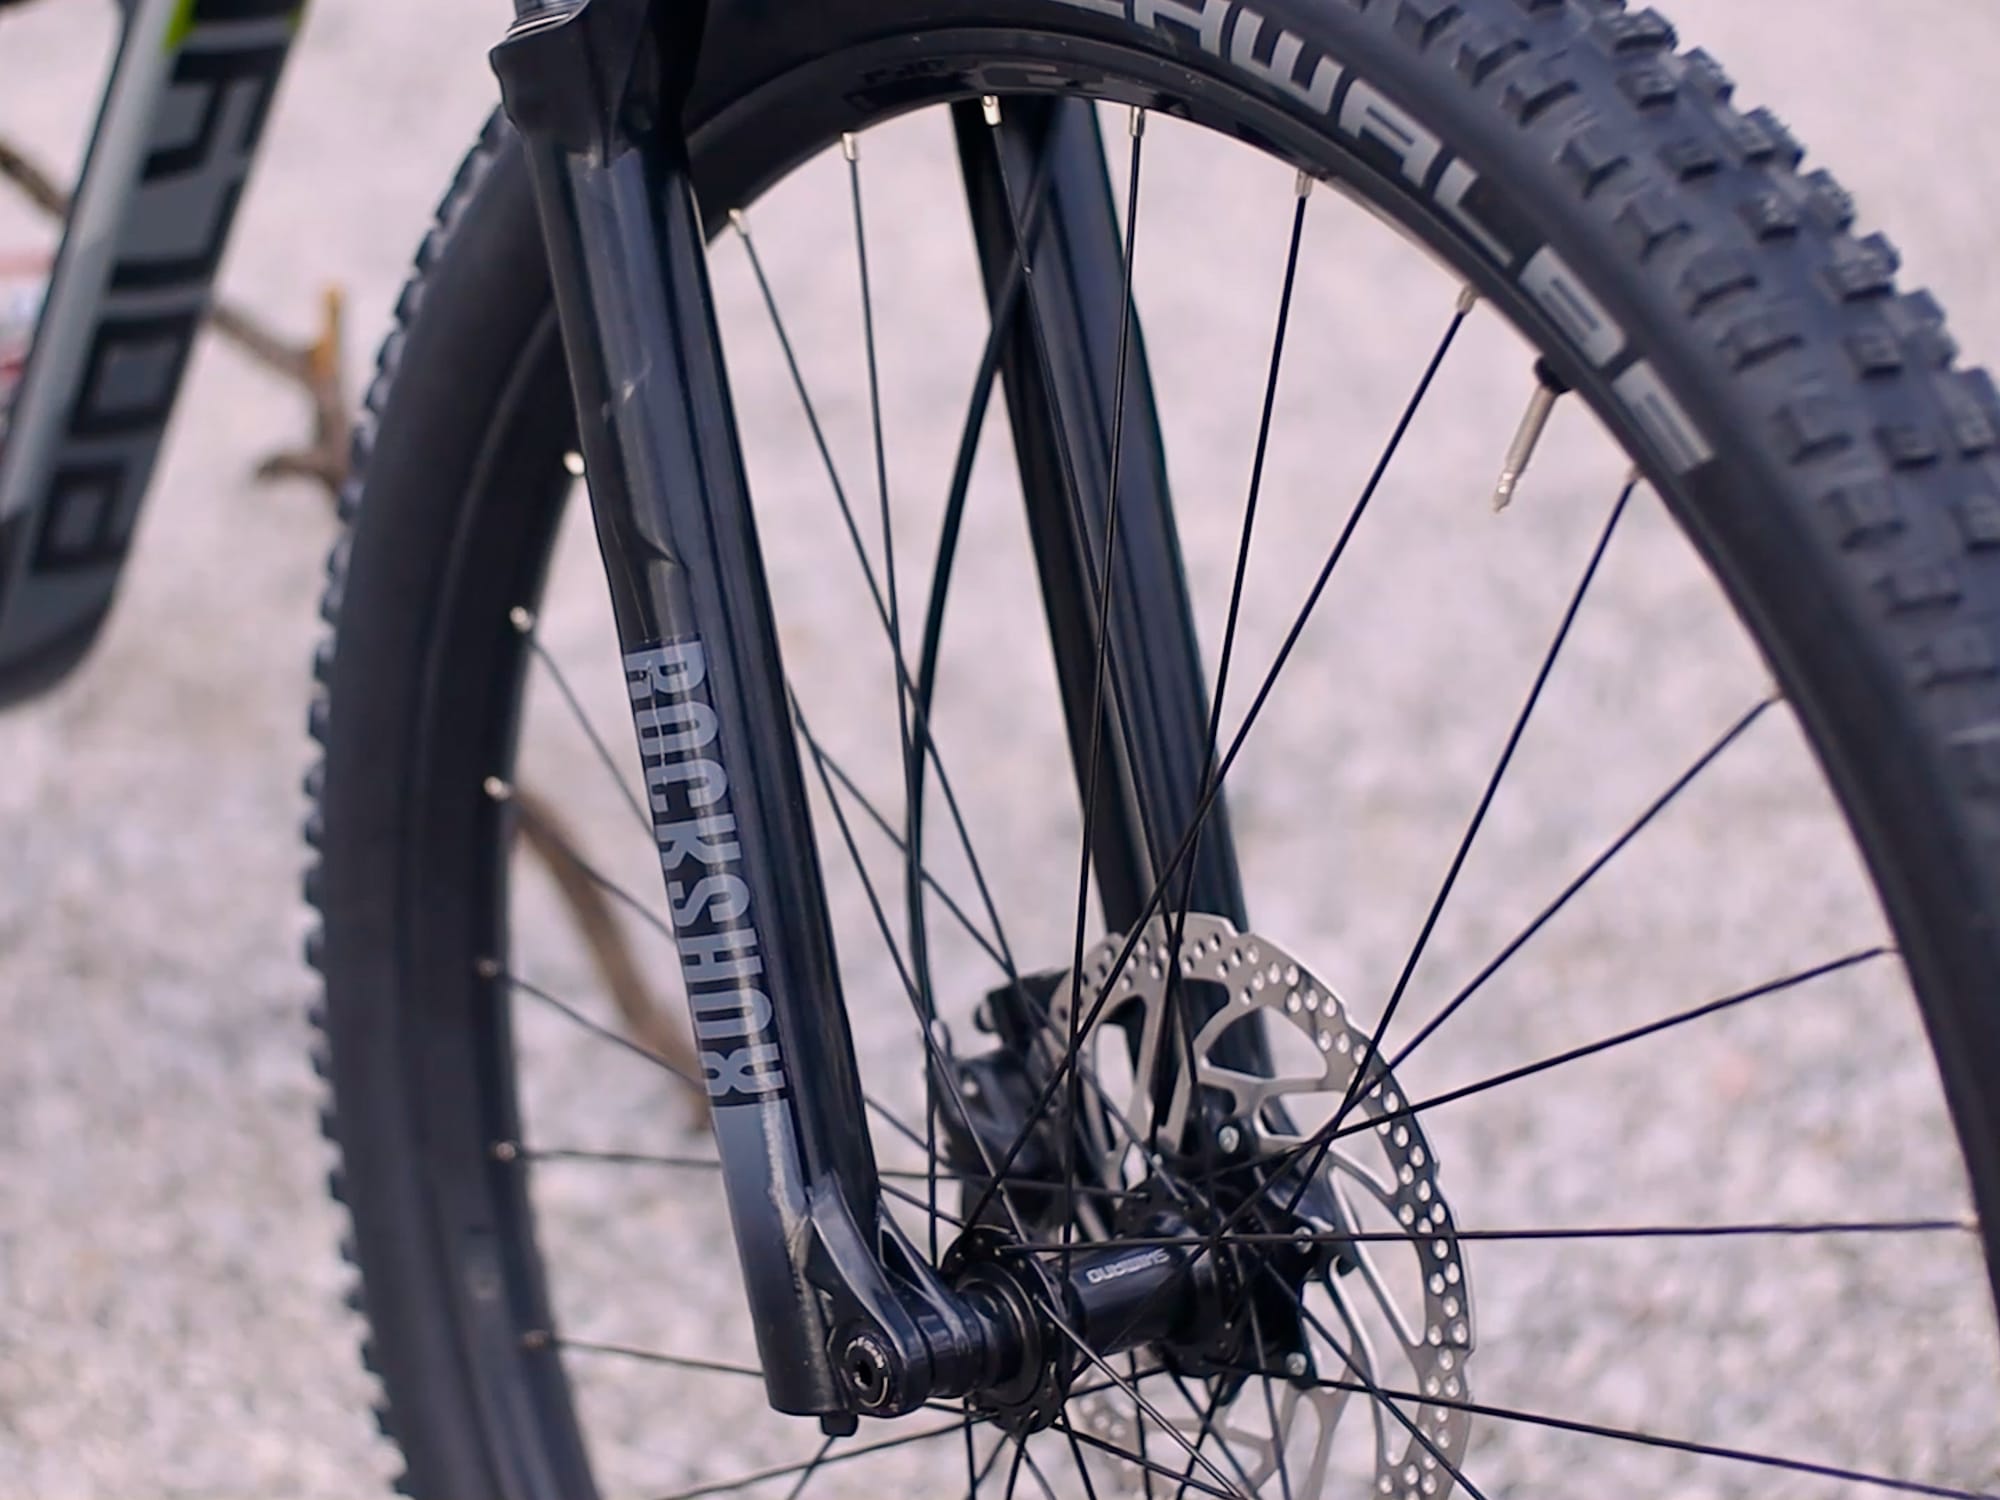 Is This The Best Budget Short-Travel Mountain Bike?